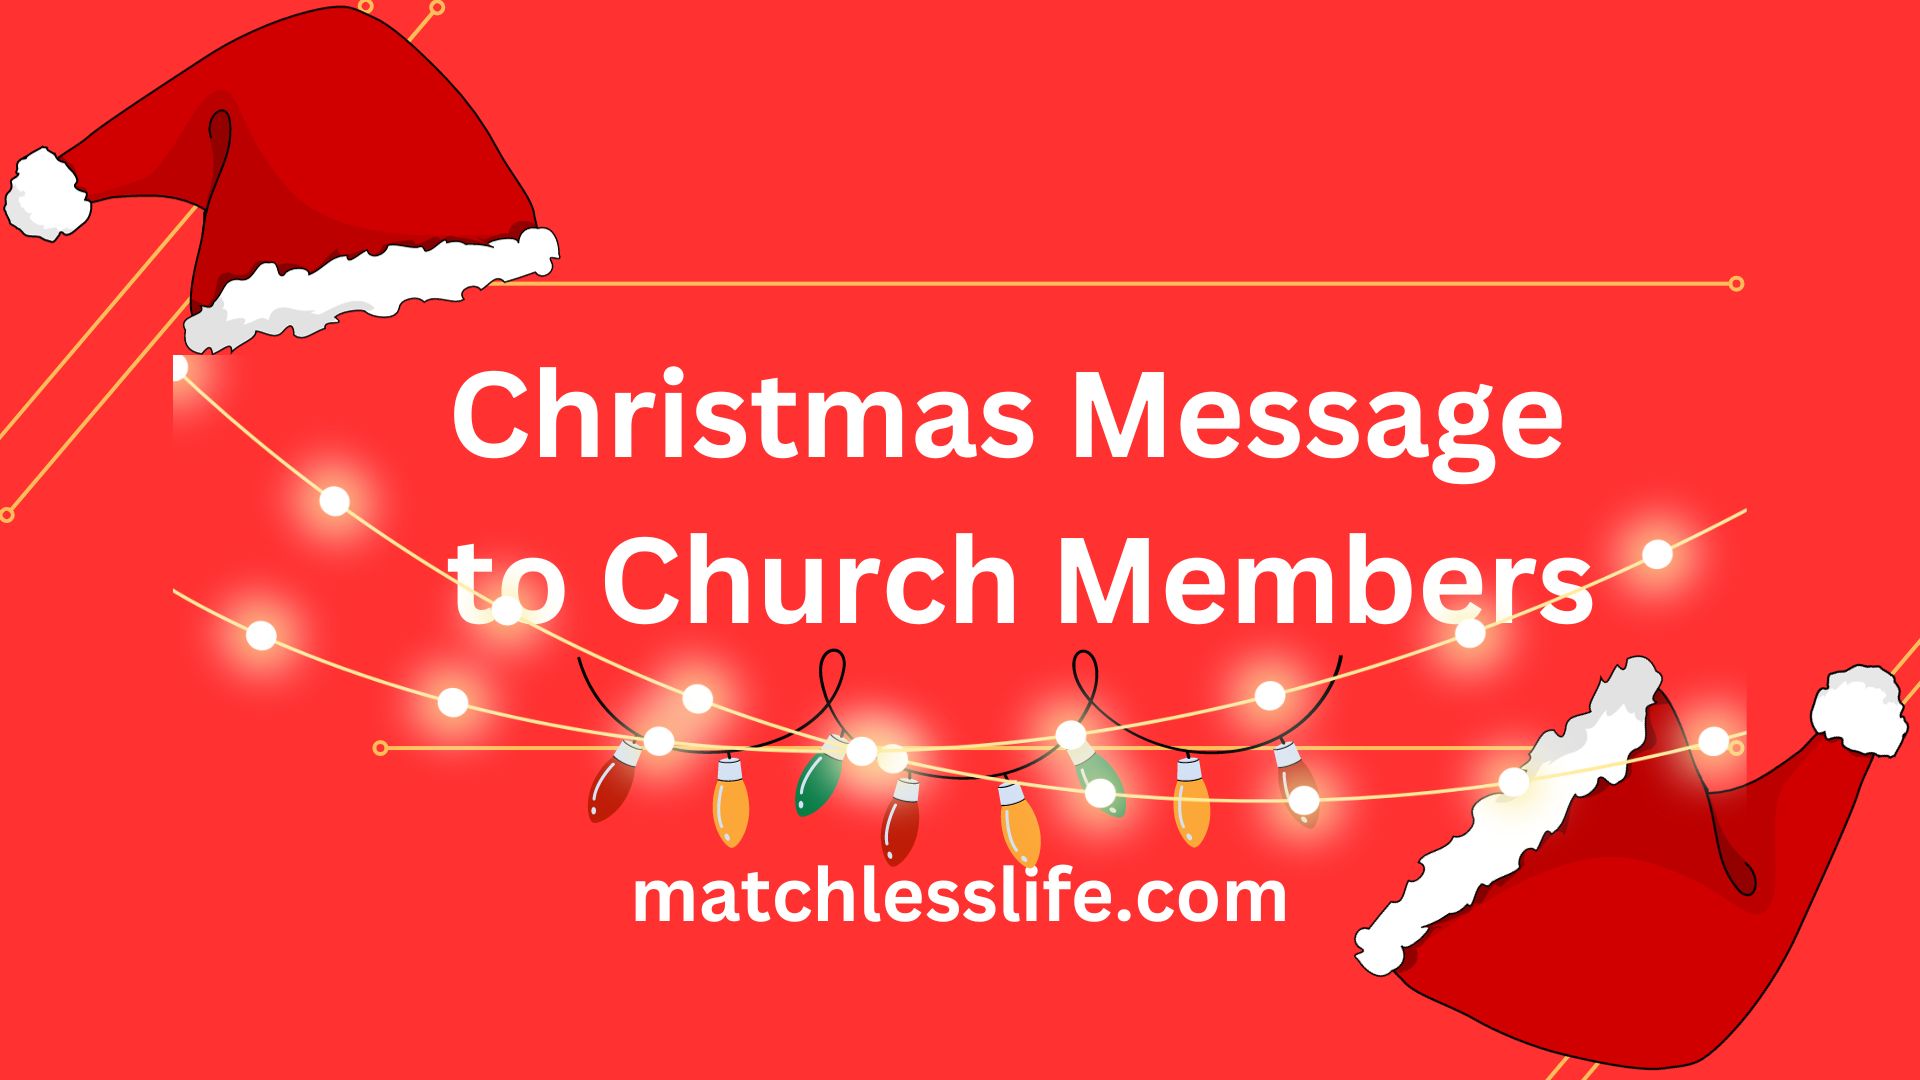 Christmas Message to Church Members